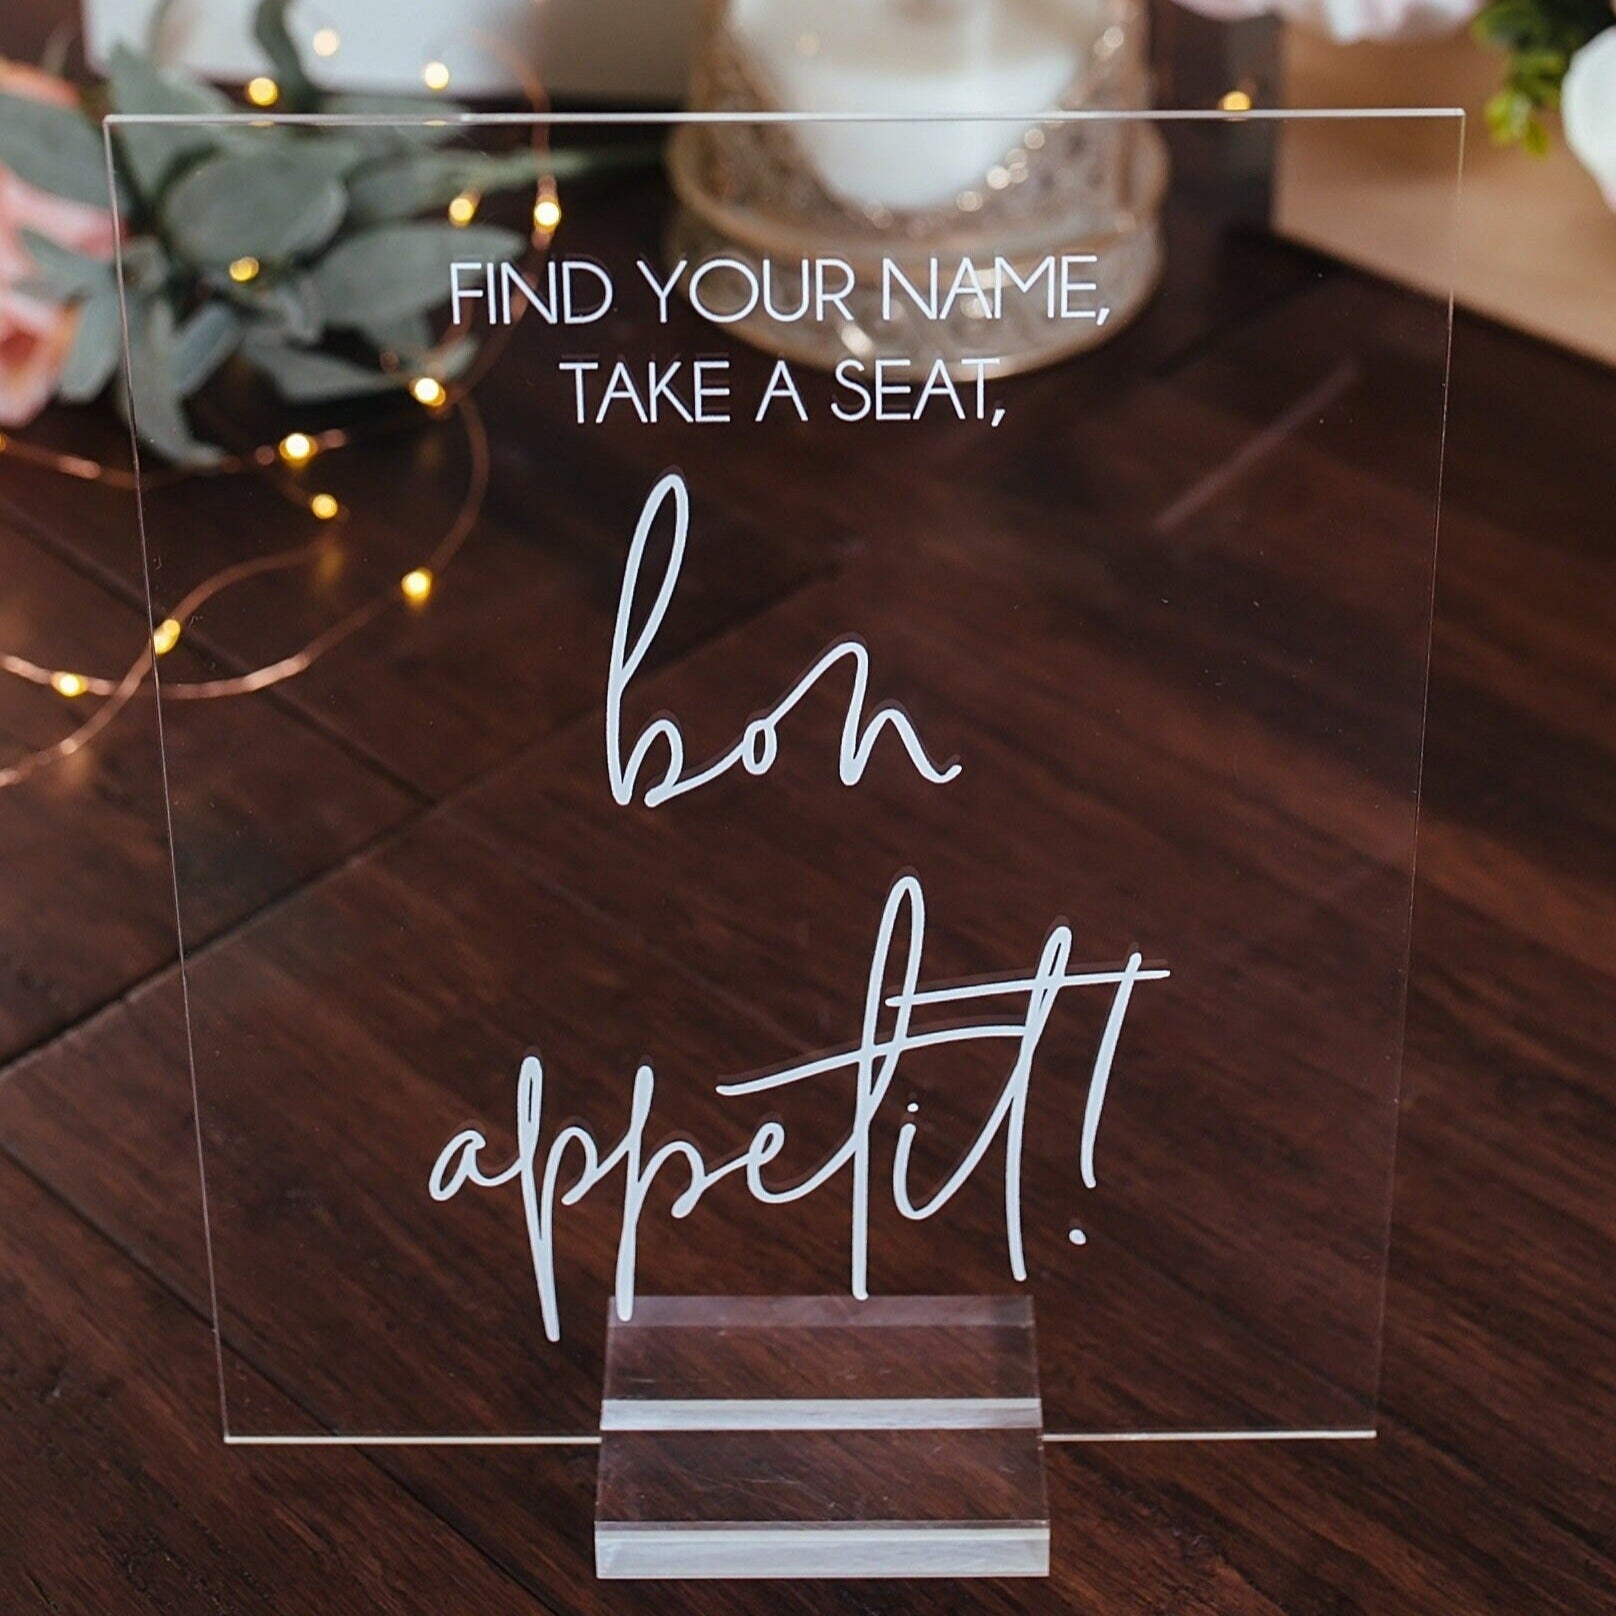 Find Your Name, Take A Seat, Bon Appetit! S3-AS26